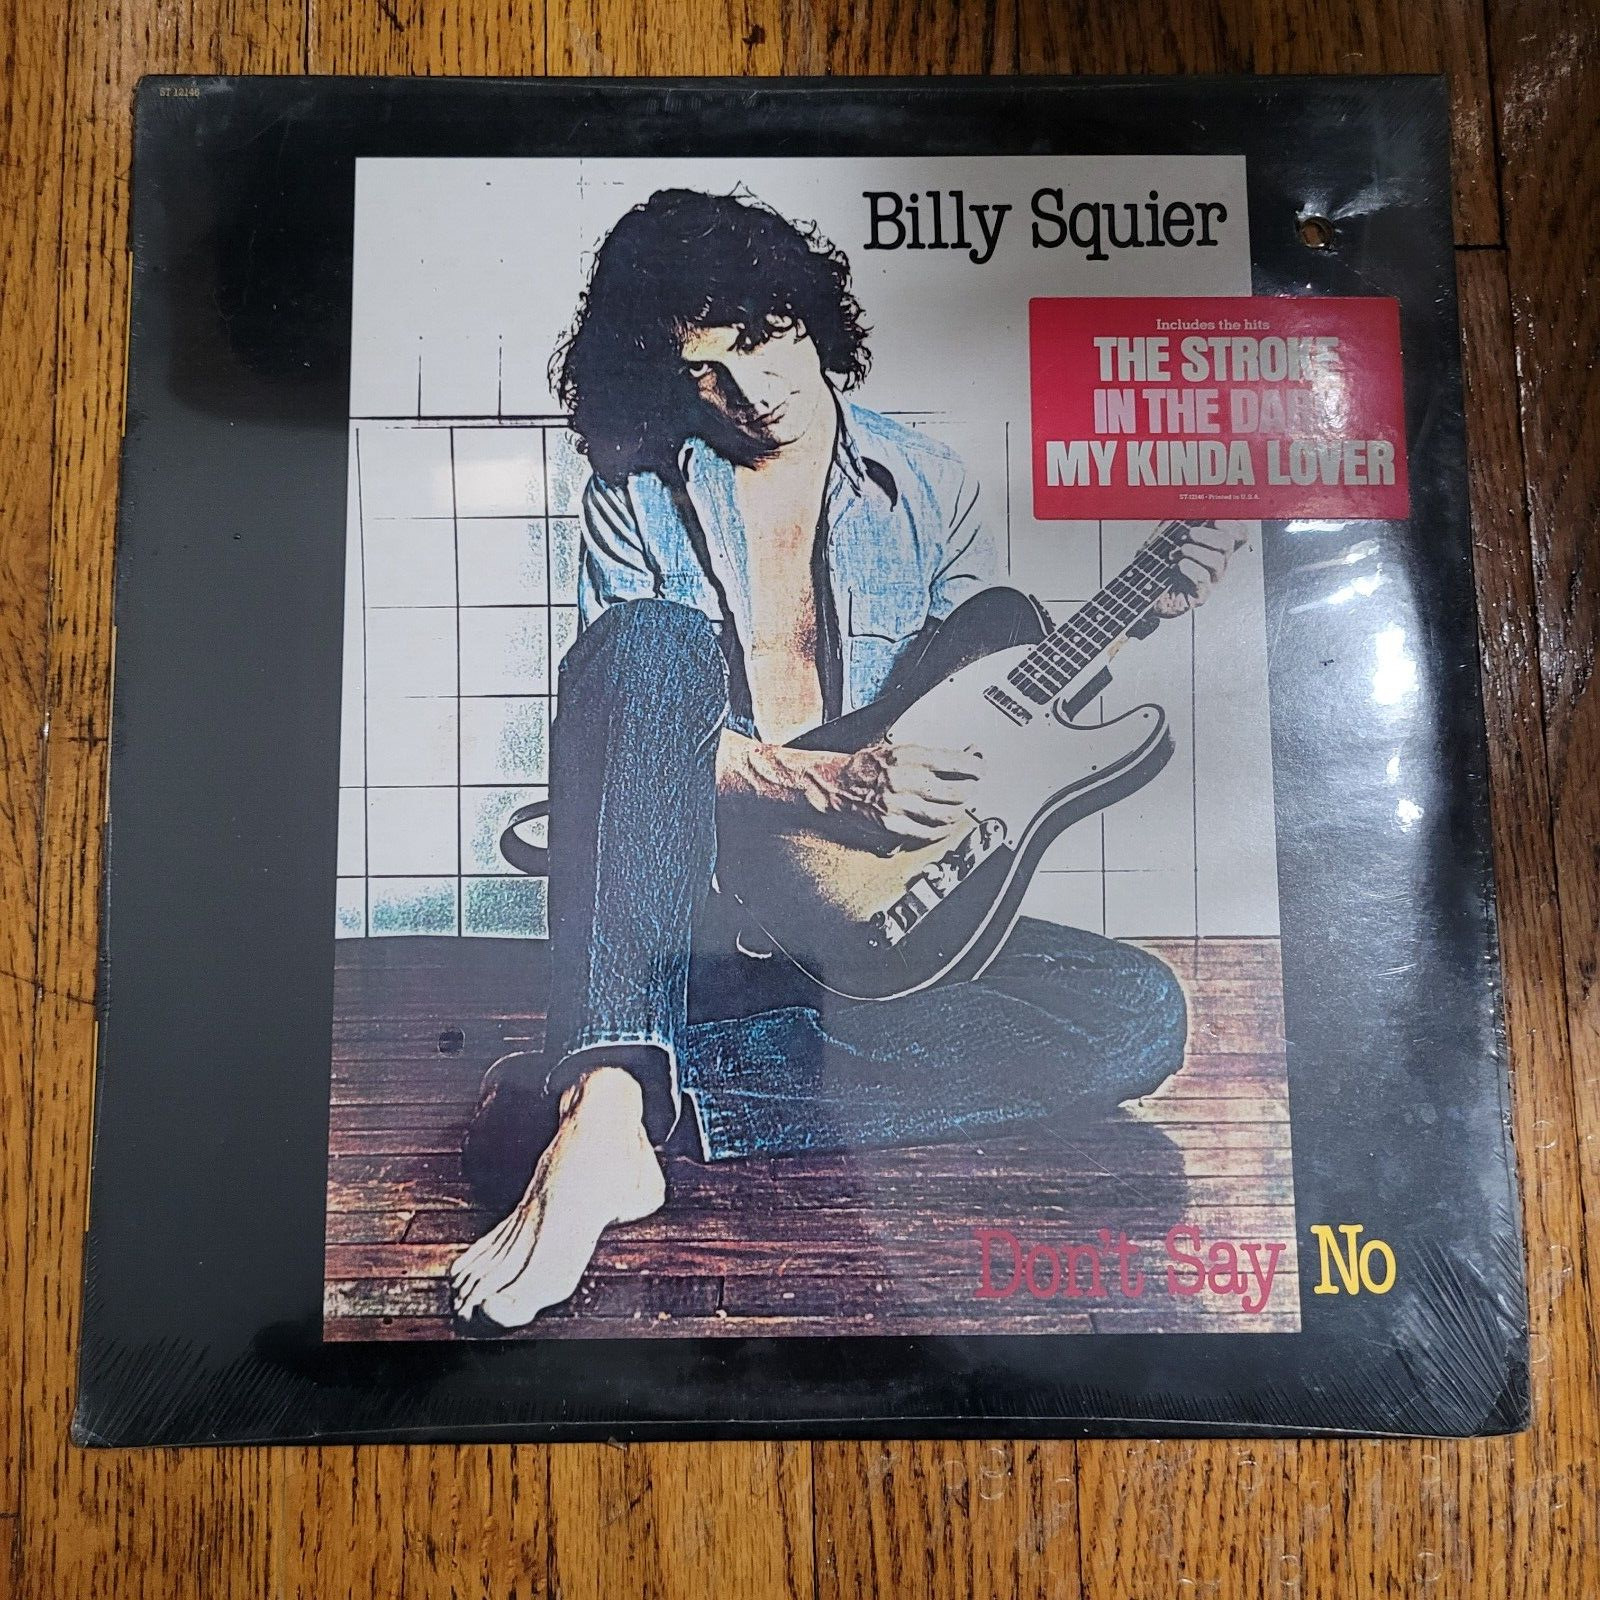 BILLY SQUIER - DON\'T SAY NO - SEALED CAPITOL RECORDS LP